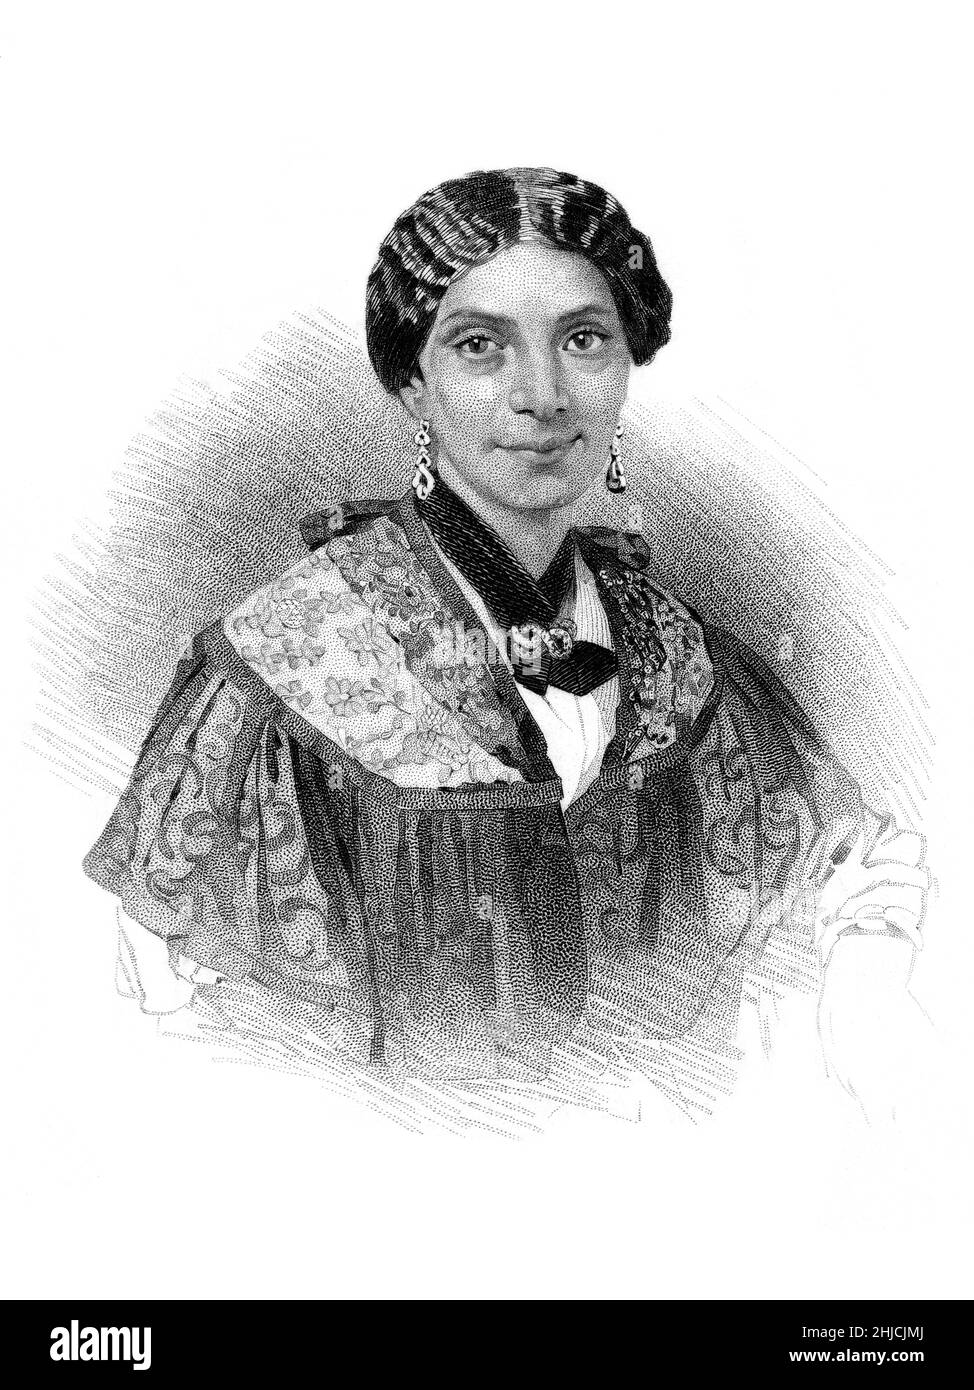 Mary Smith Peake (1823 - February 22, 1862) was an African-American teacher who taught the children of former slaves under a large oak tree that later became known as the Emancipation Oak. The American Missionary Association paid her salary as its first black teacher. Soon the AMA provided Peake with Brown Cottage, considered the first facility of Hampton Institute (Hampton University). Engraving by Frederick W. Halpin, 1863. Stock Photo